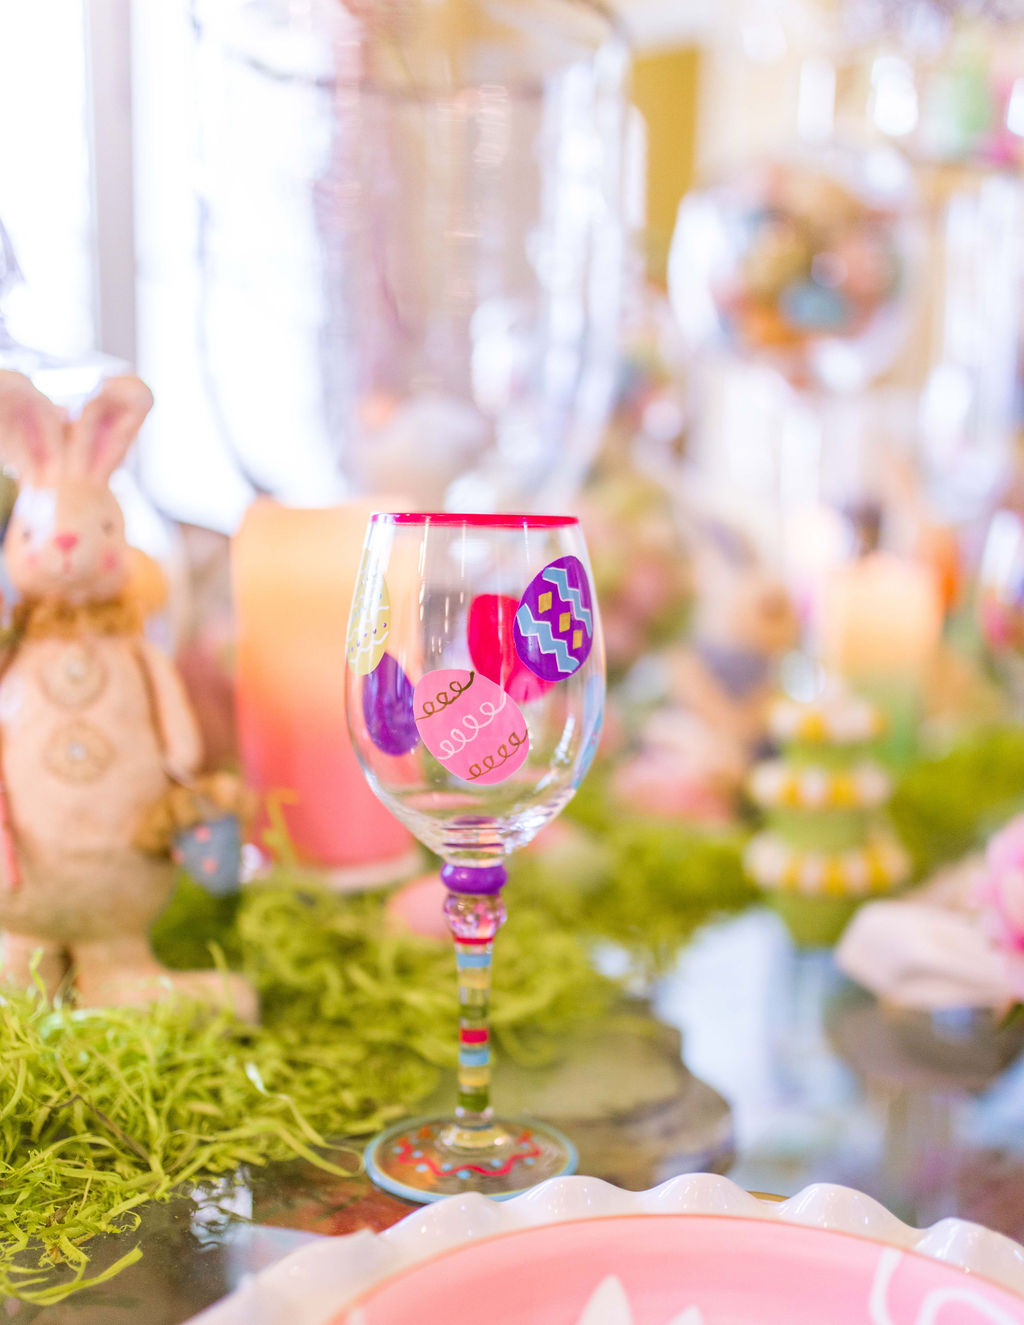 Easter tablescapes by home decor blogger Turtle Creek Lane.